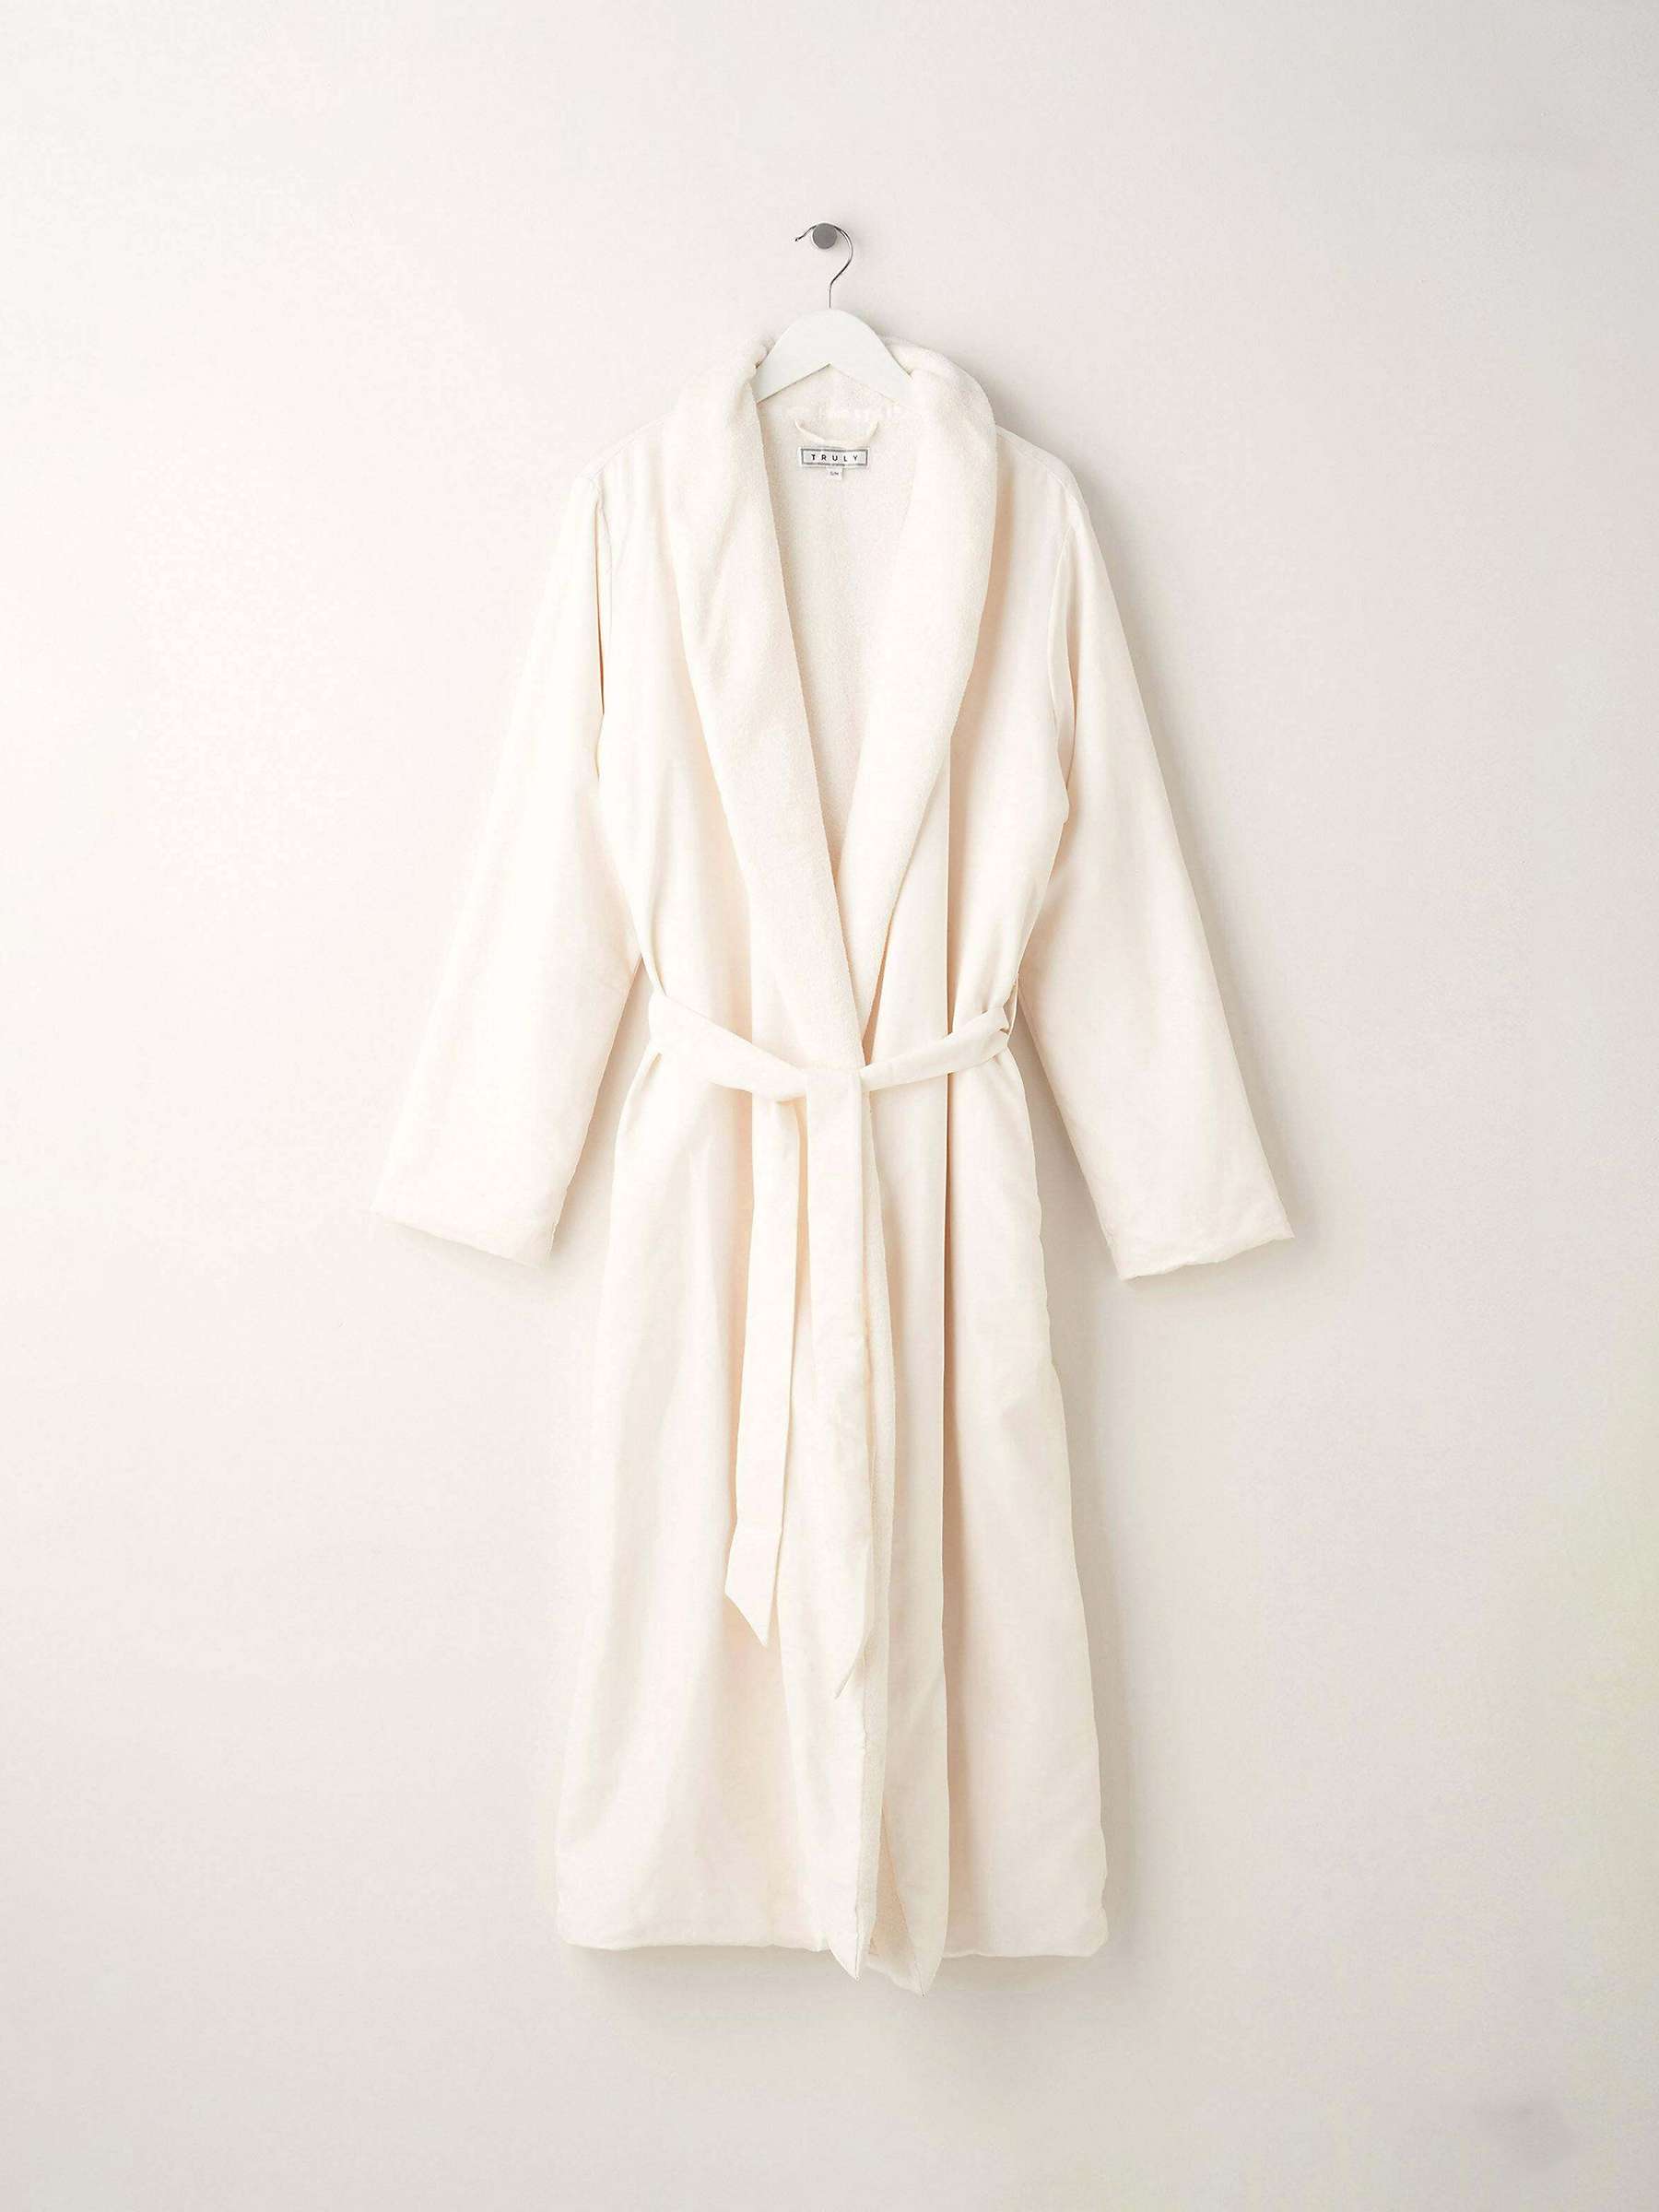 Buy Truly Fleece Lined Dressing Gown, Star White Online at johnlewis.com